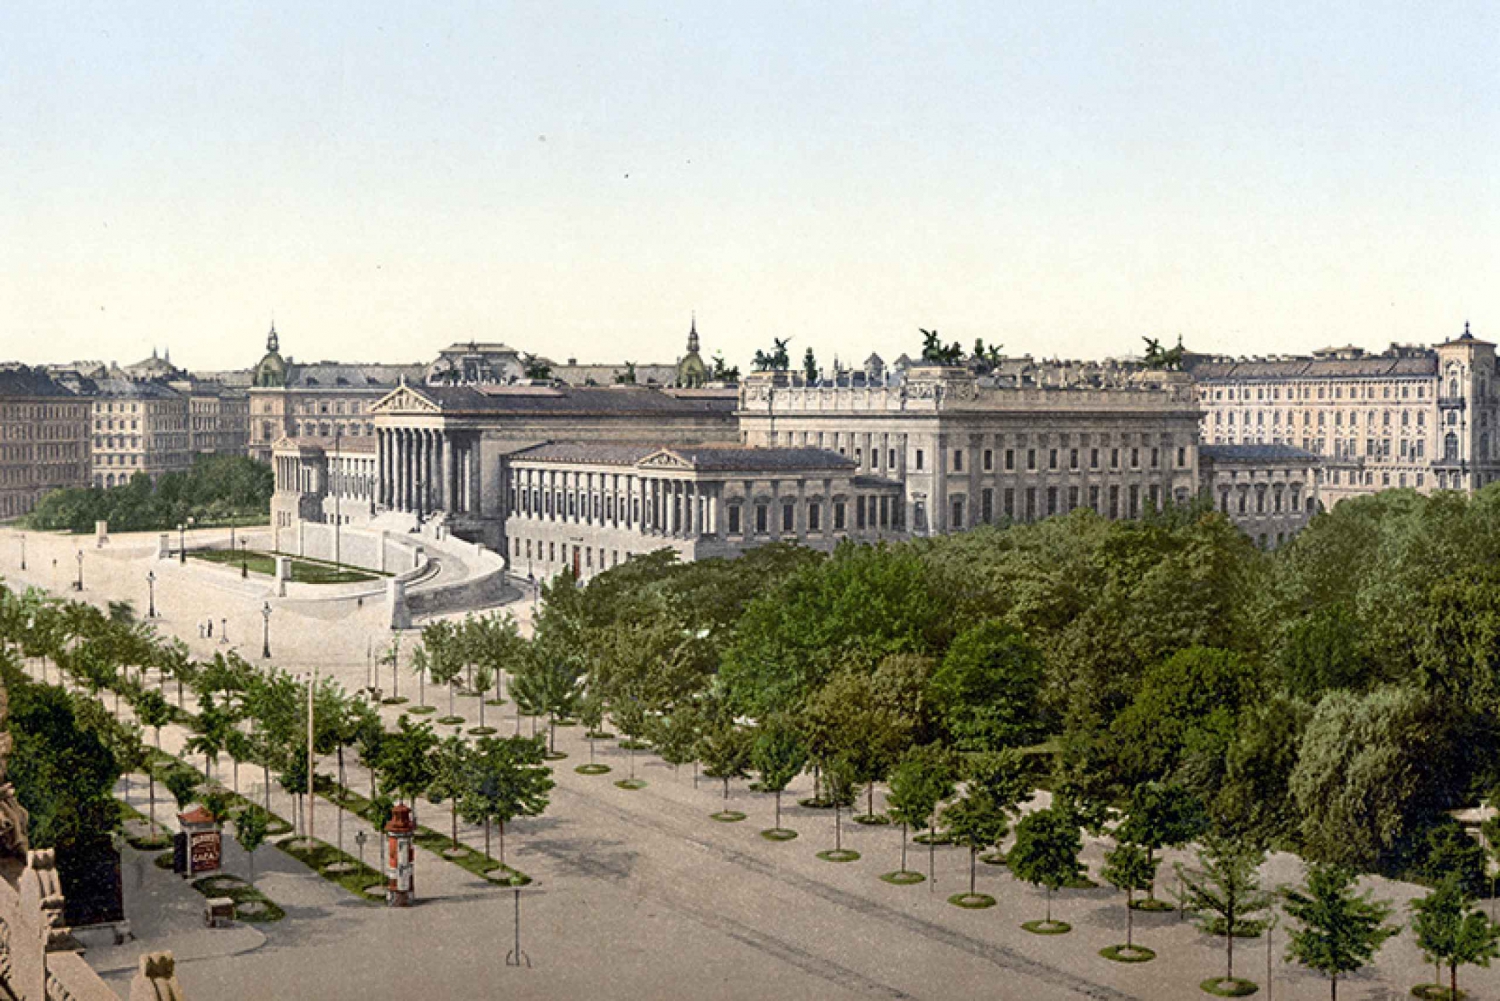 Vienna’s Ringstrasse: 3-Hour Walk with a Historian